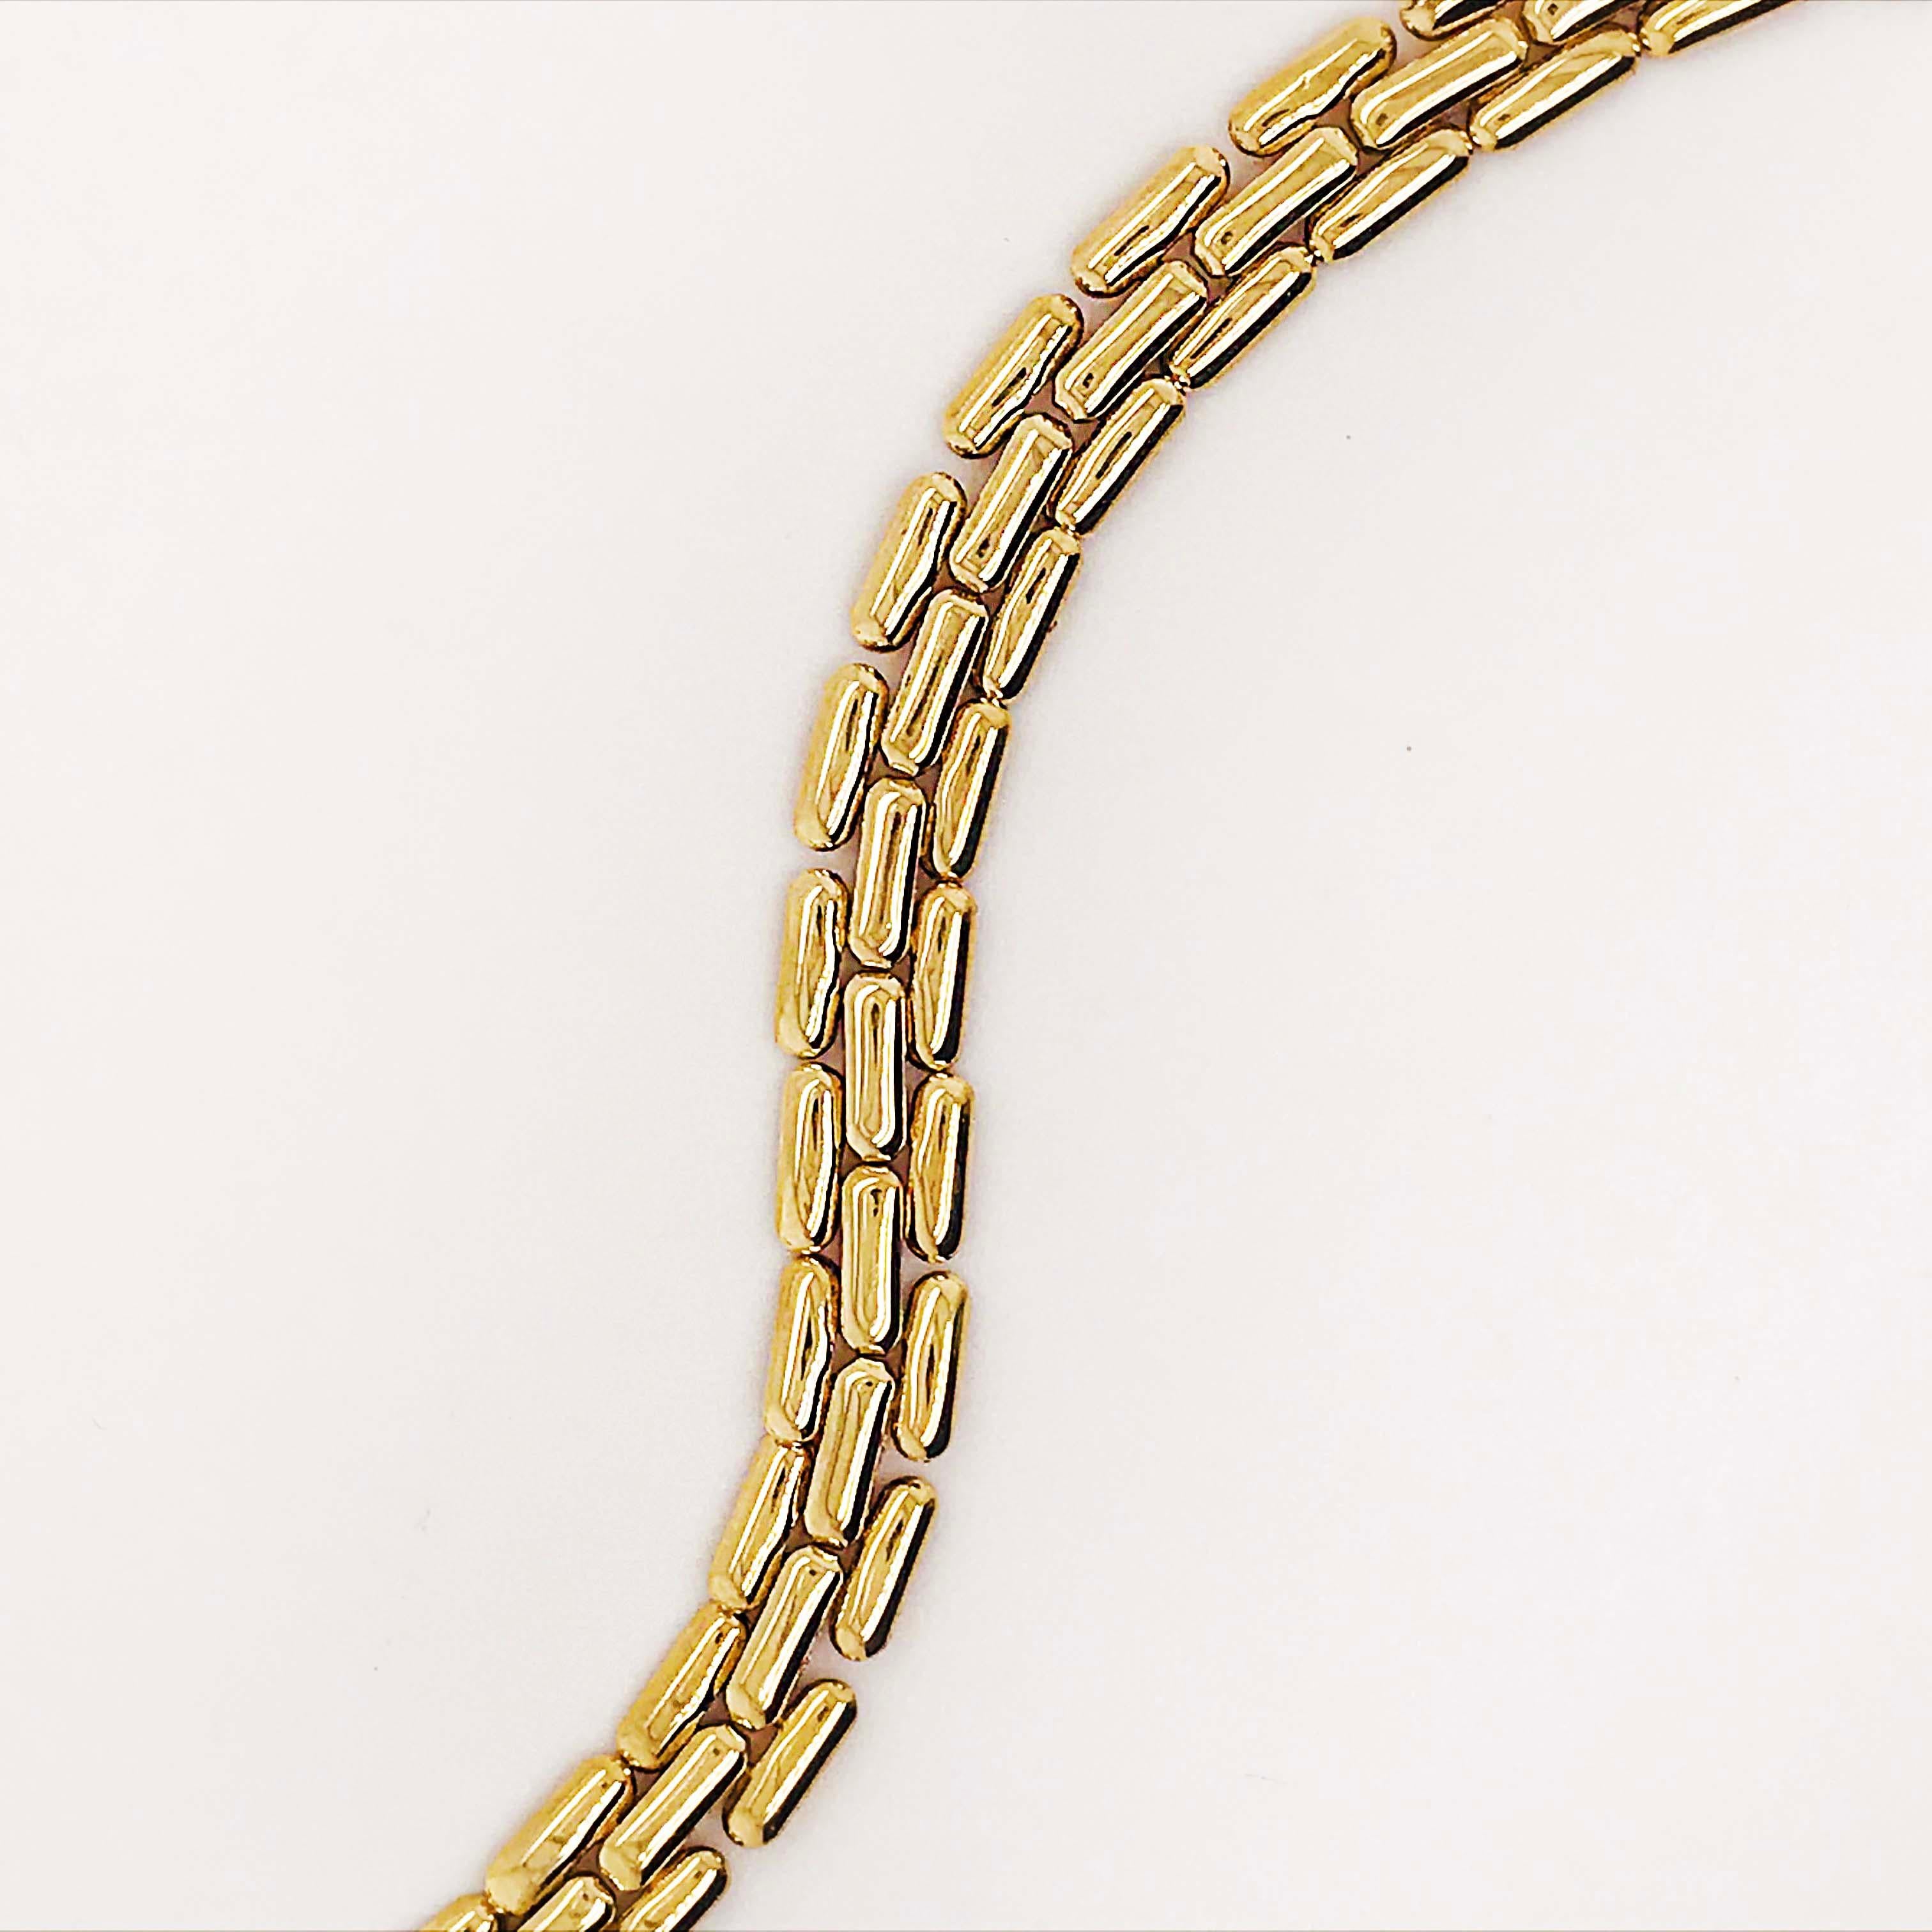 Gold Panther Chain Bracelet with Large Lobster Clasp, 14 Karat Yellow Gold 4